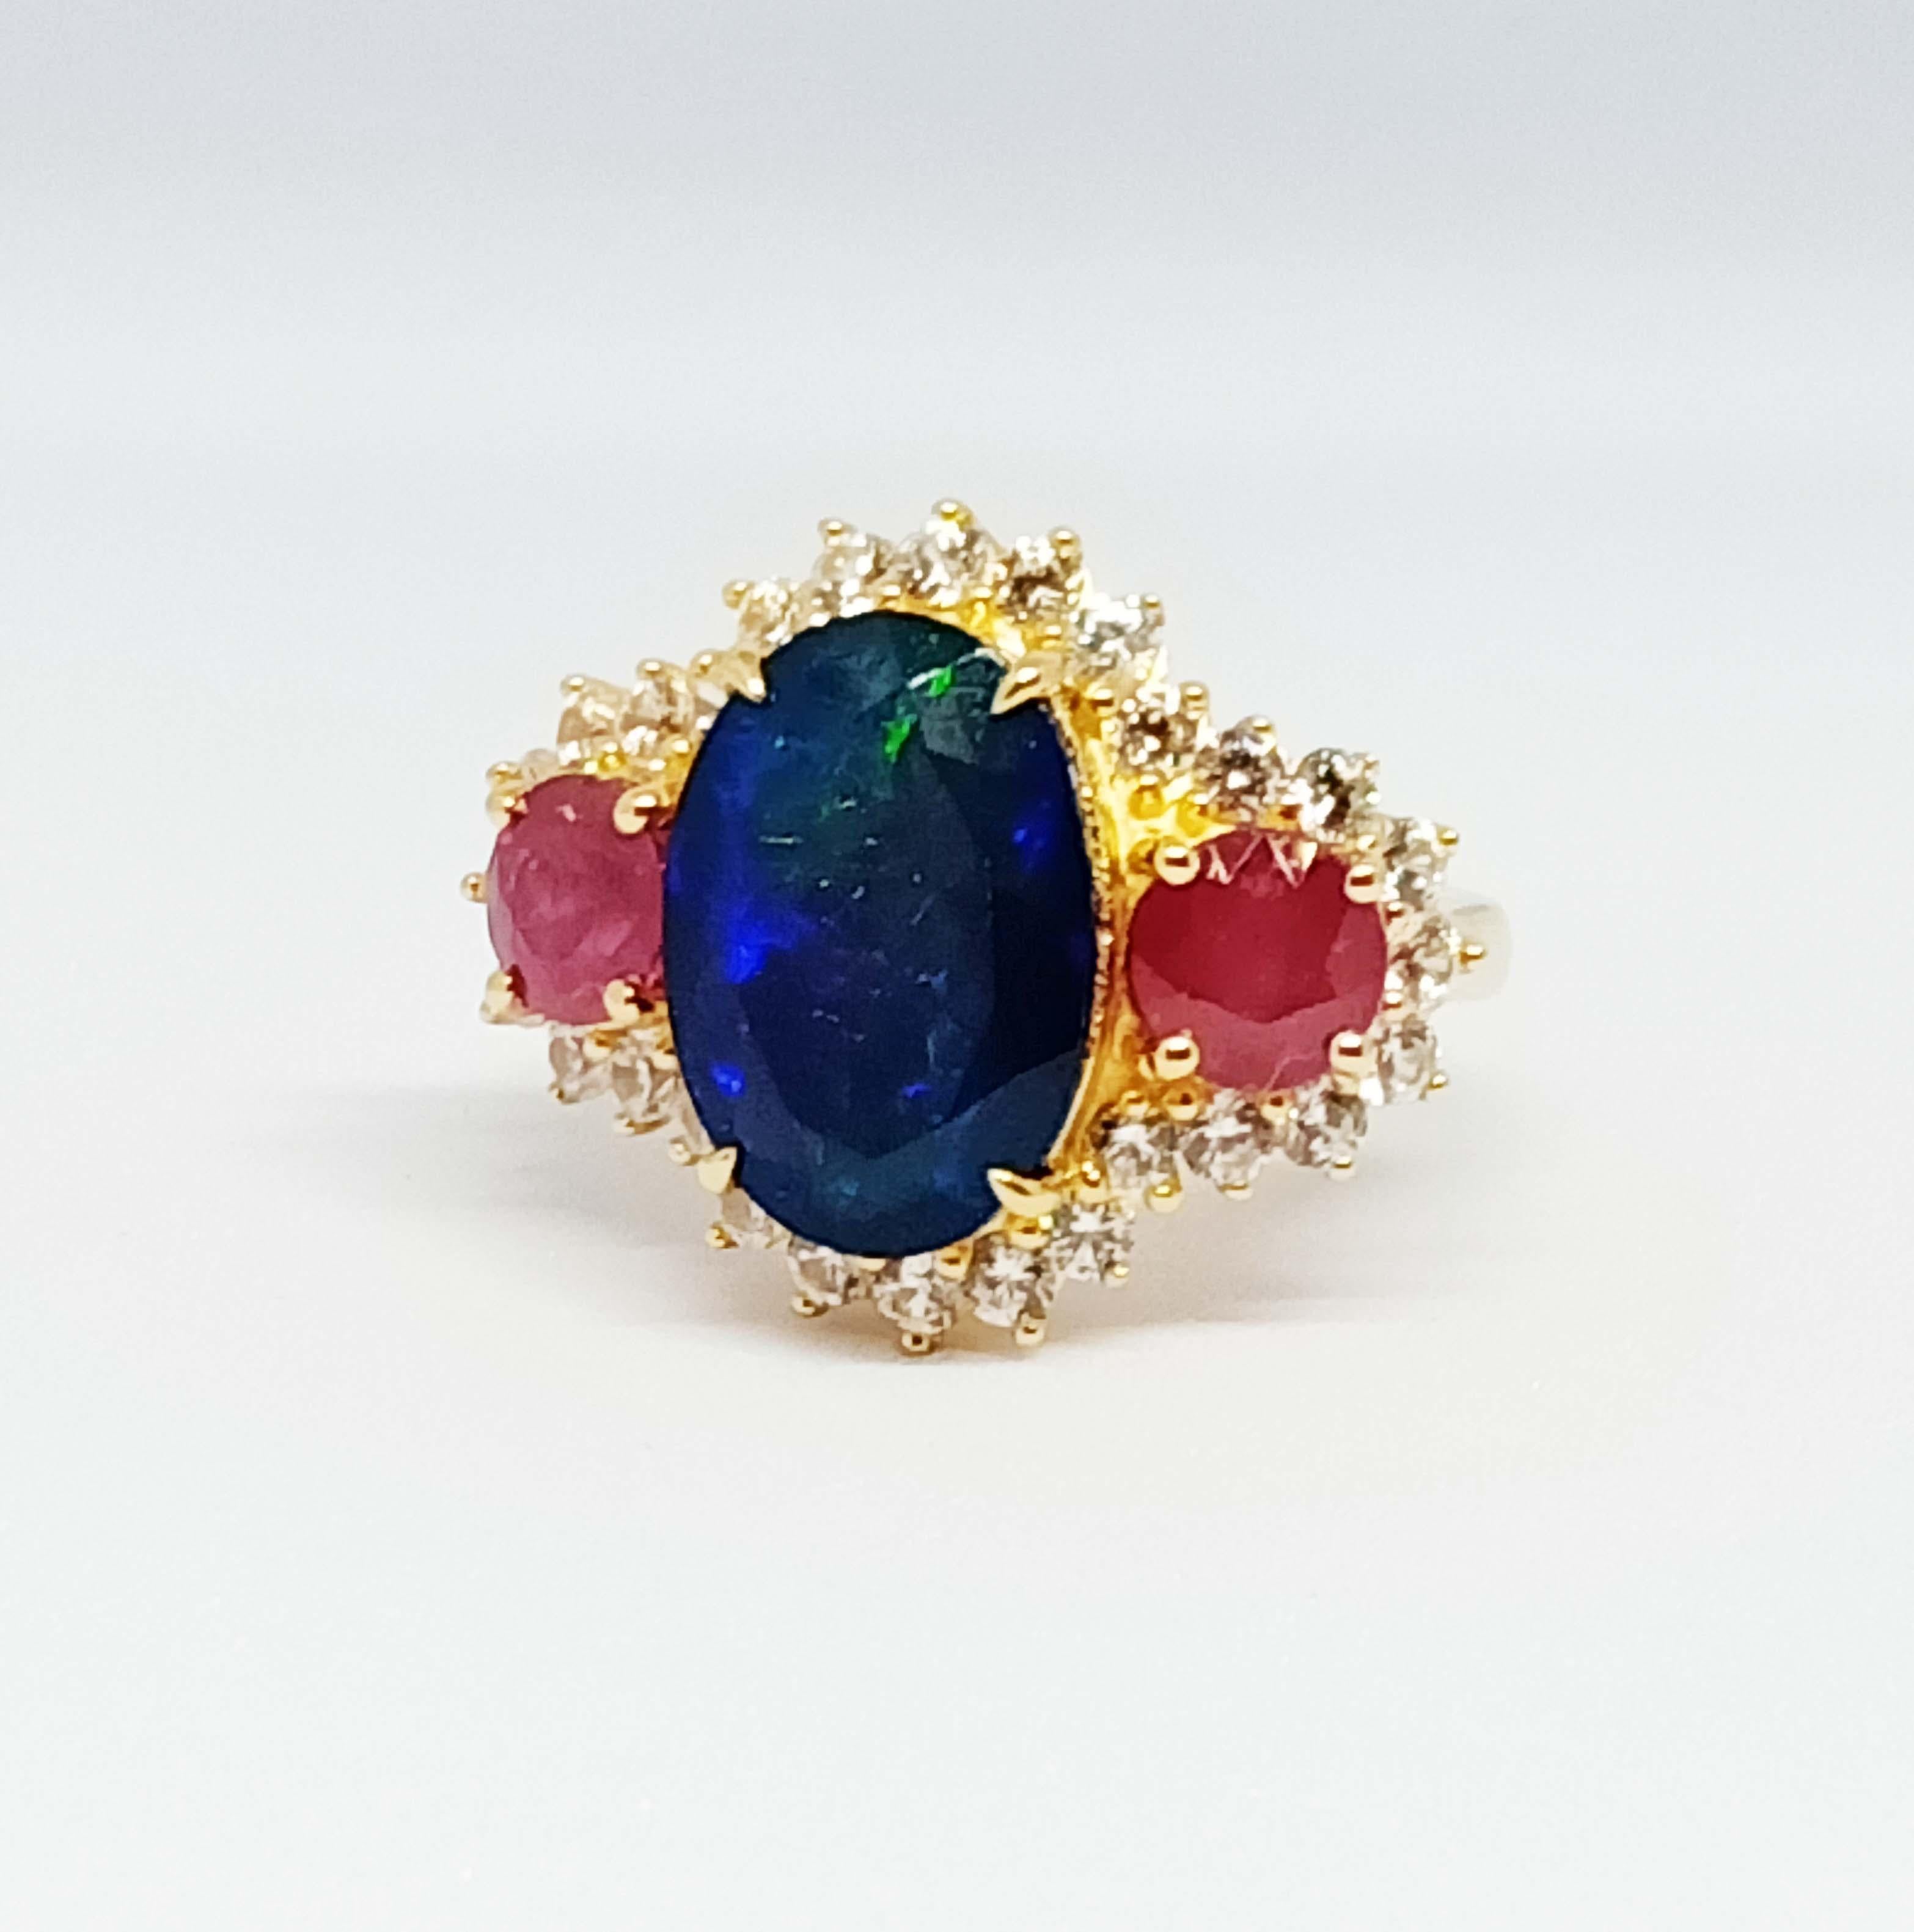 Baroque 7.09 cts. Black Opal Ring. Sterling silver on 18K Gold Plated